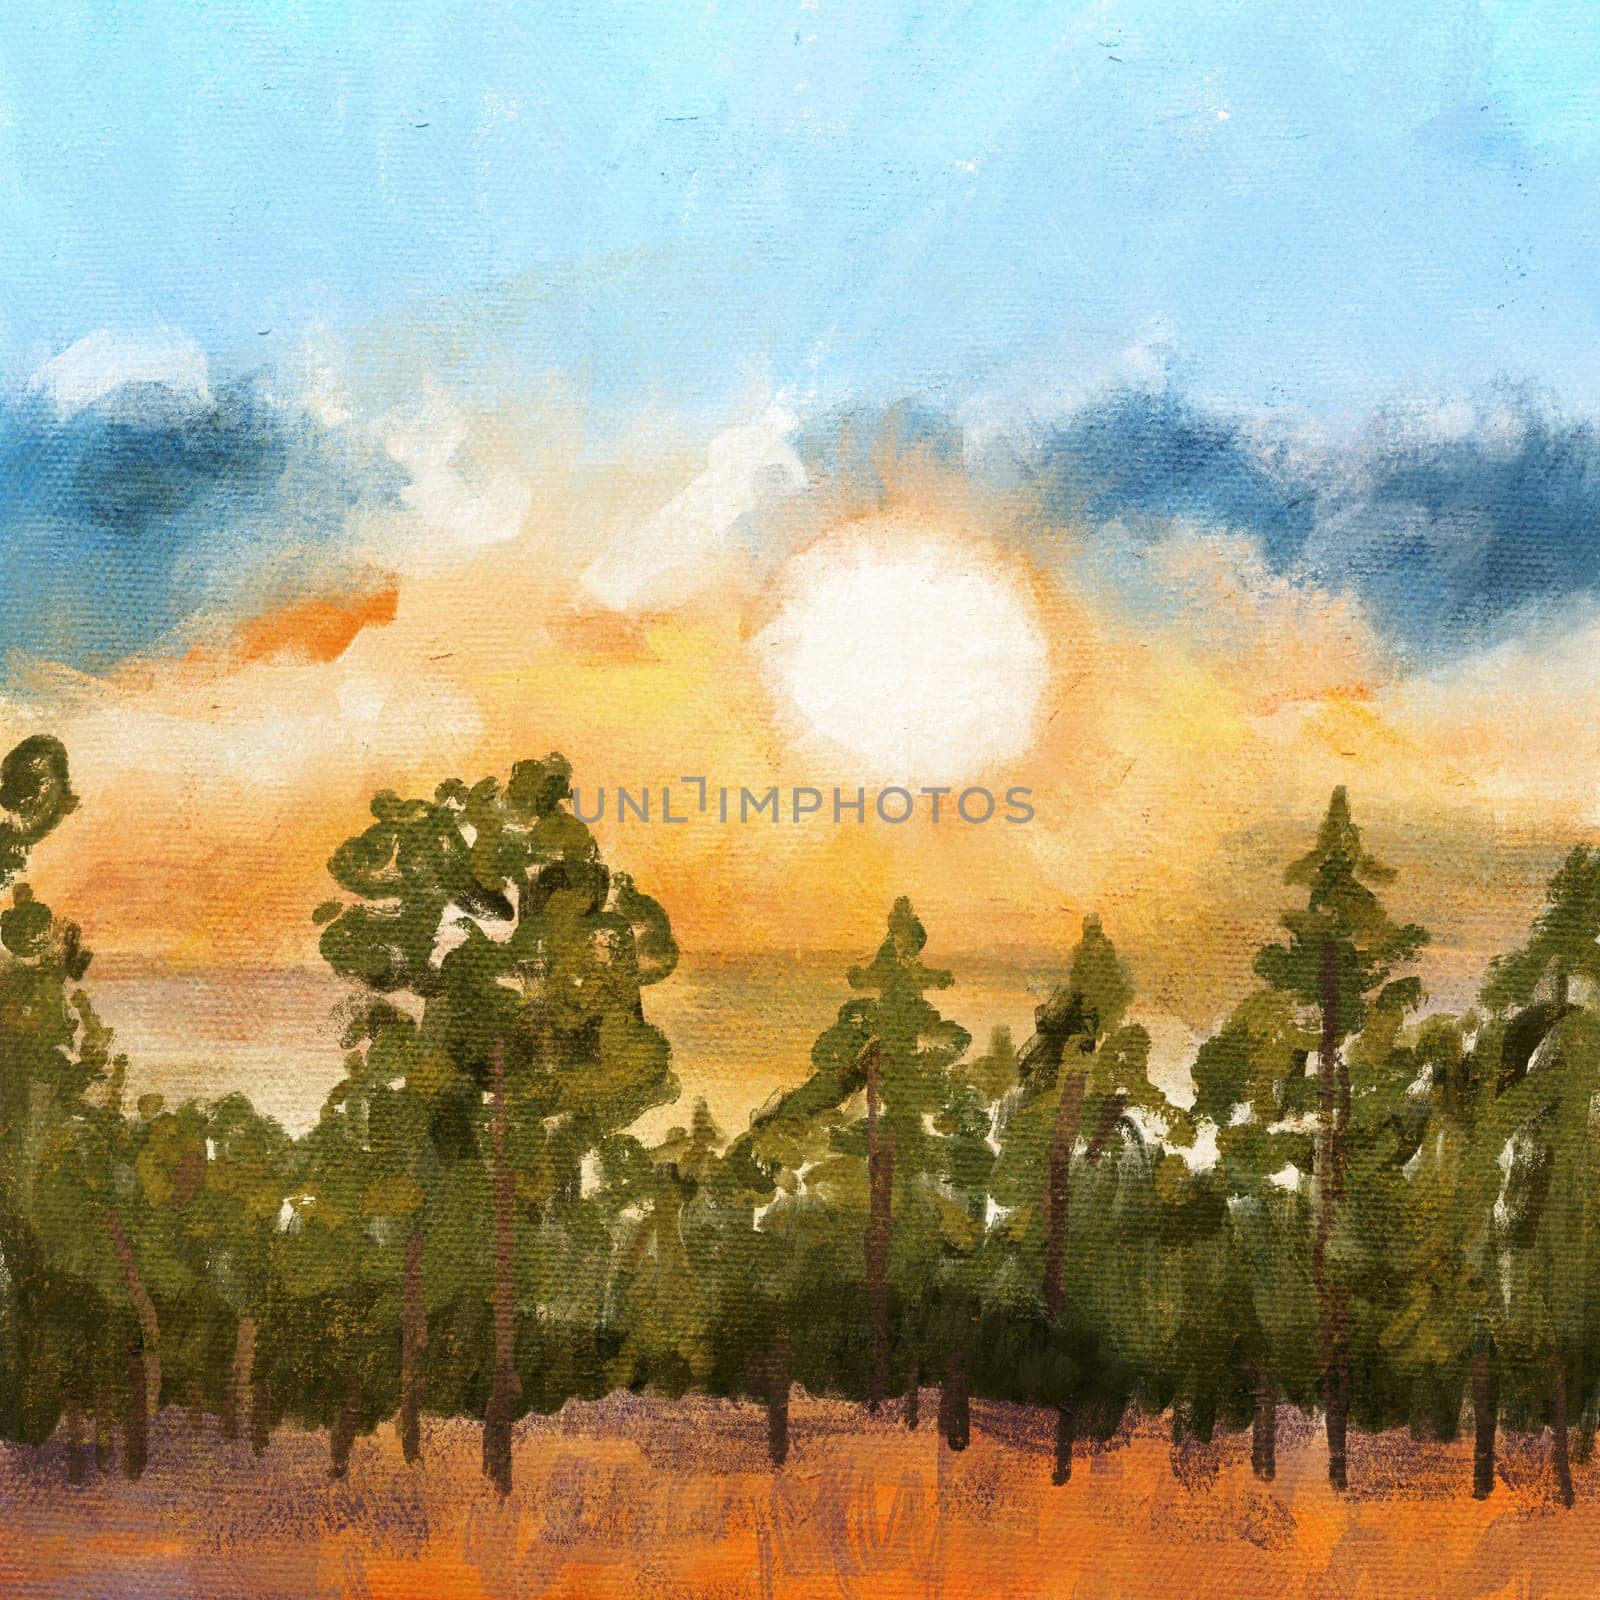 Hand drawn illustration of forest wood in sunrise sunset sky. Pine fir trees in evening light blye sky, nature landscape view, outdoor scenery. Oil painting paints texture. by Lagmar